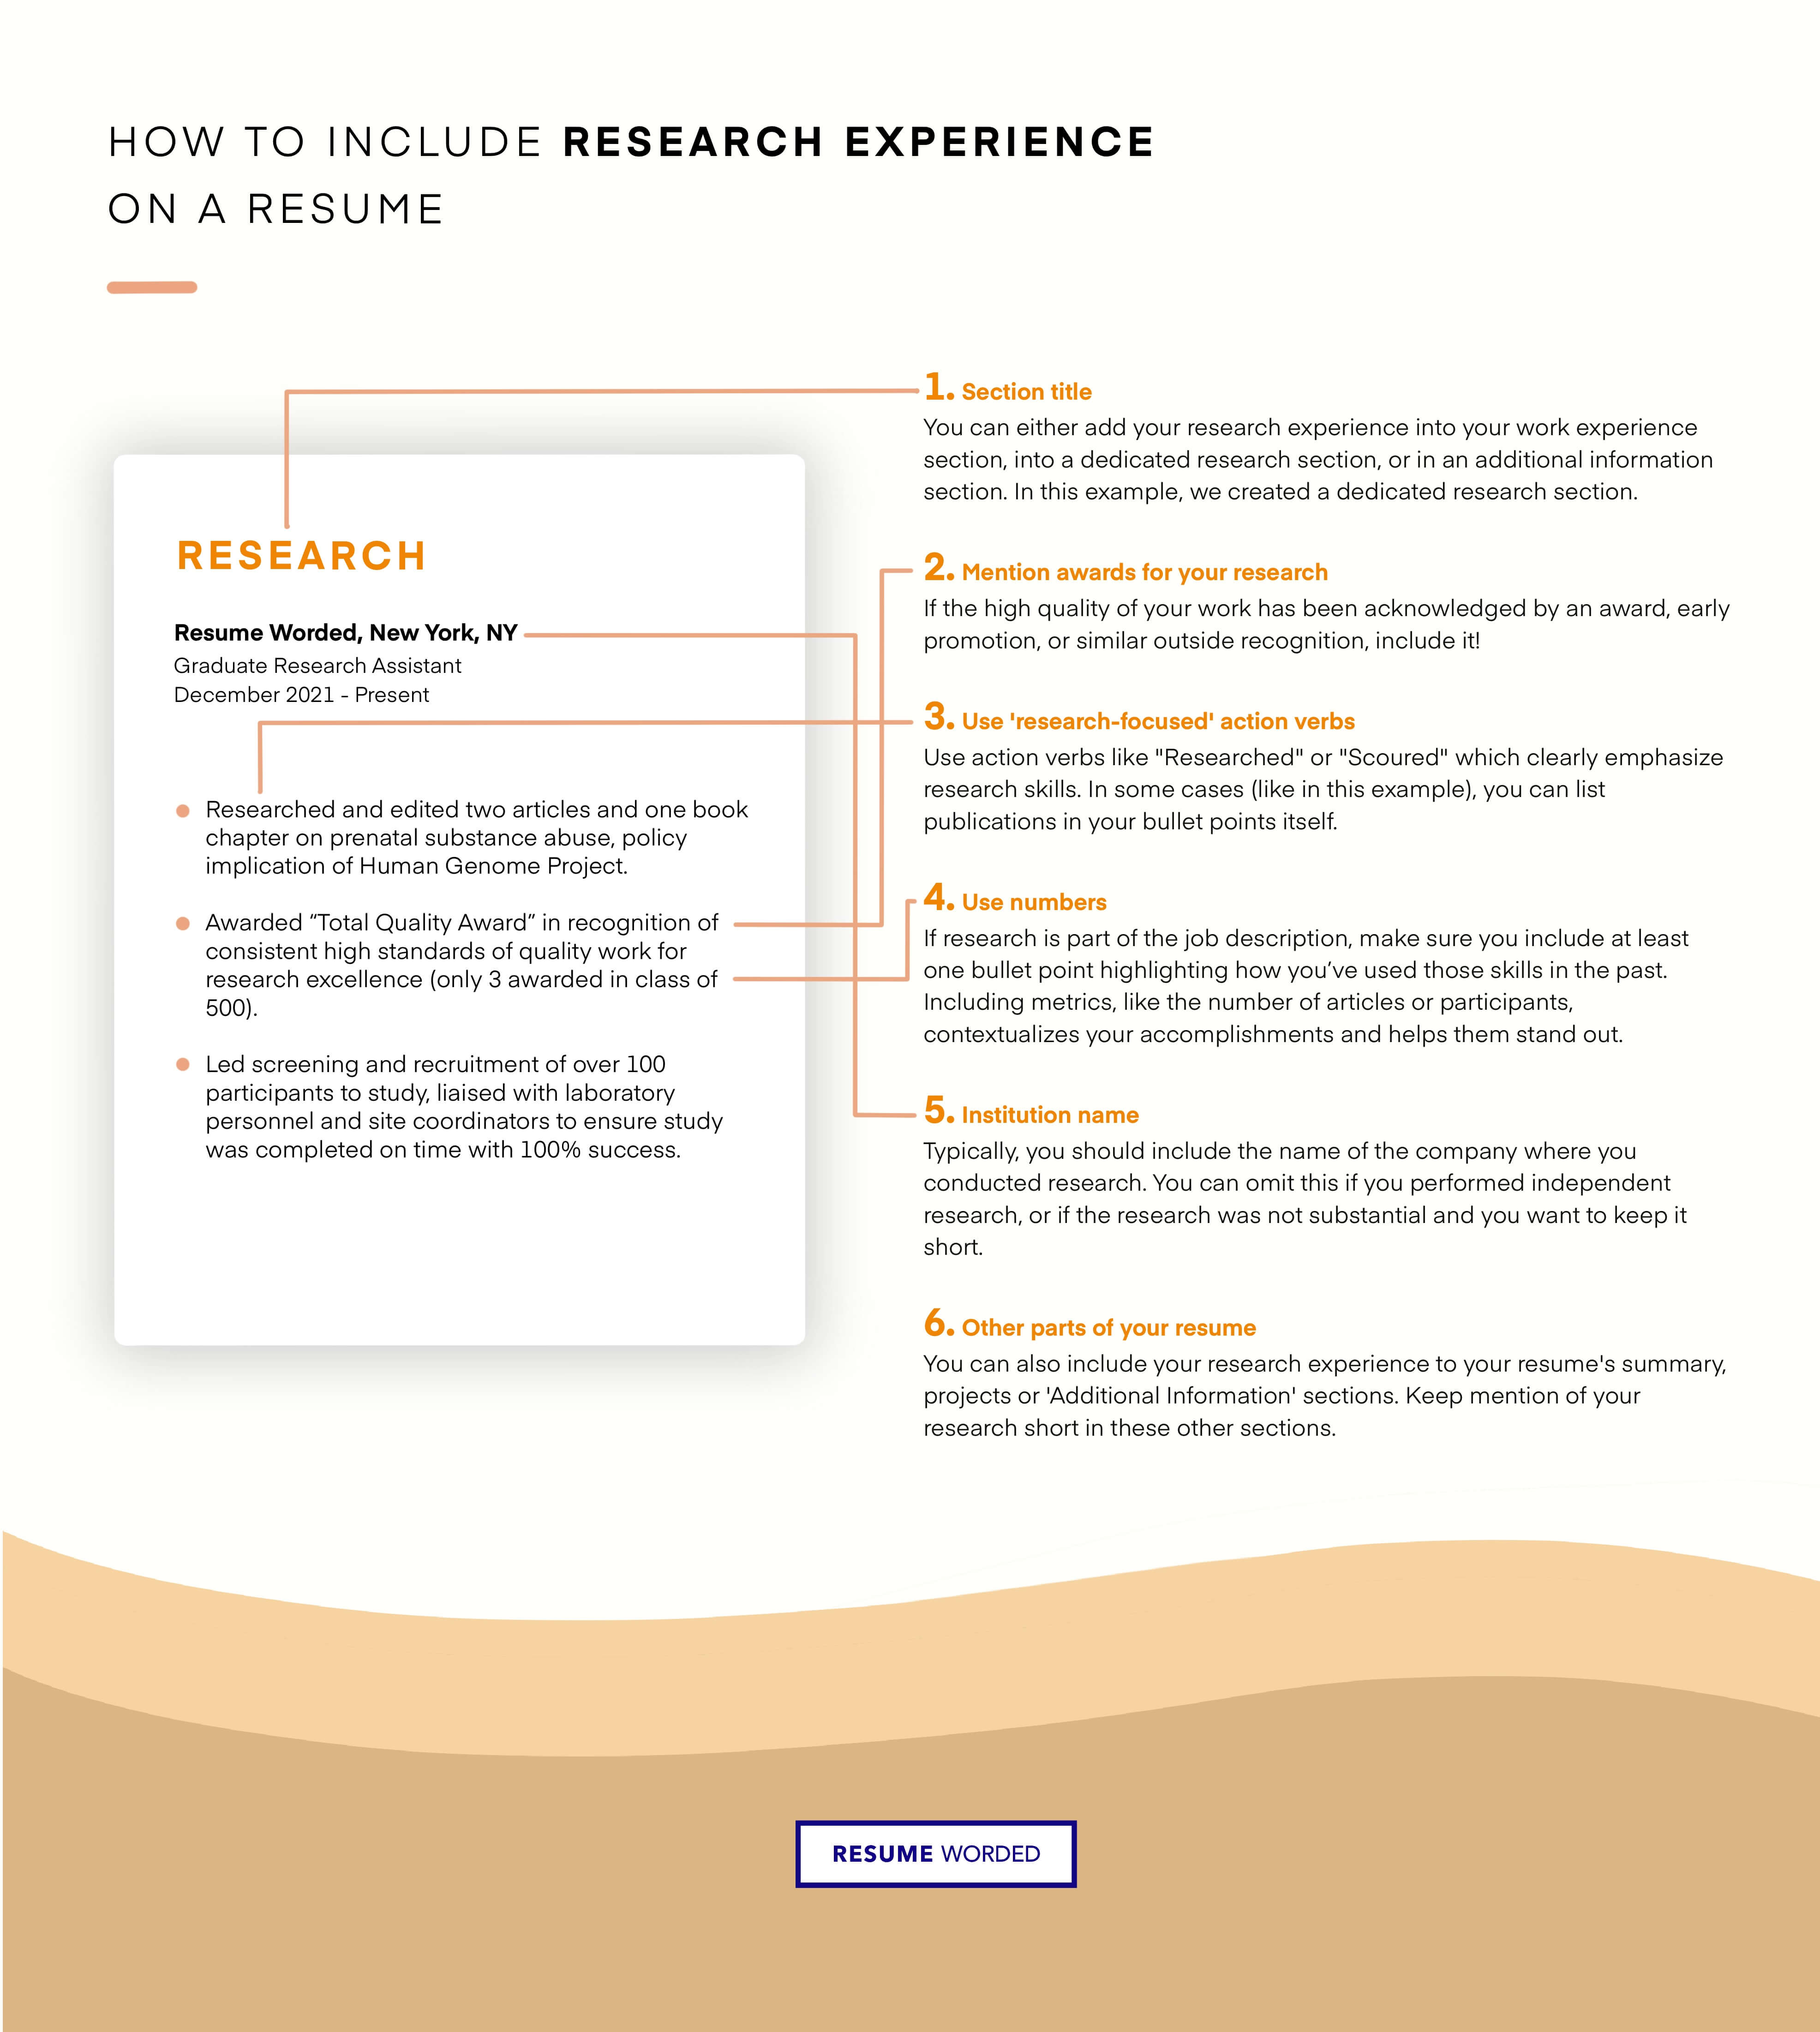 Demonstrate your proficiency in research tools - Market Research Analyst CV